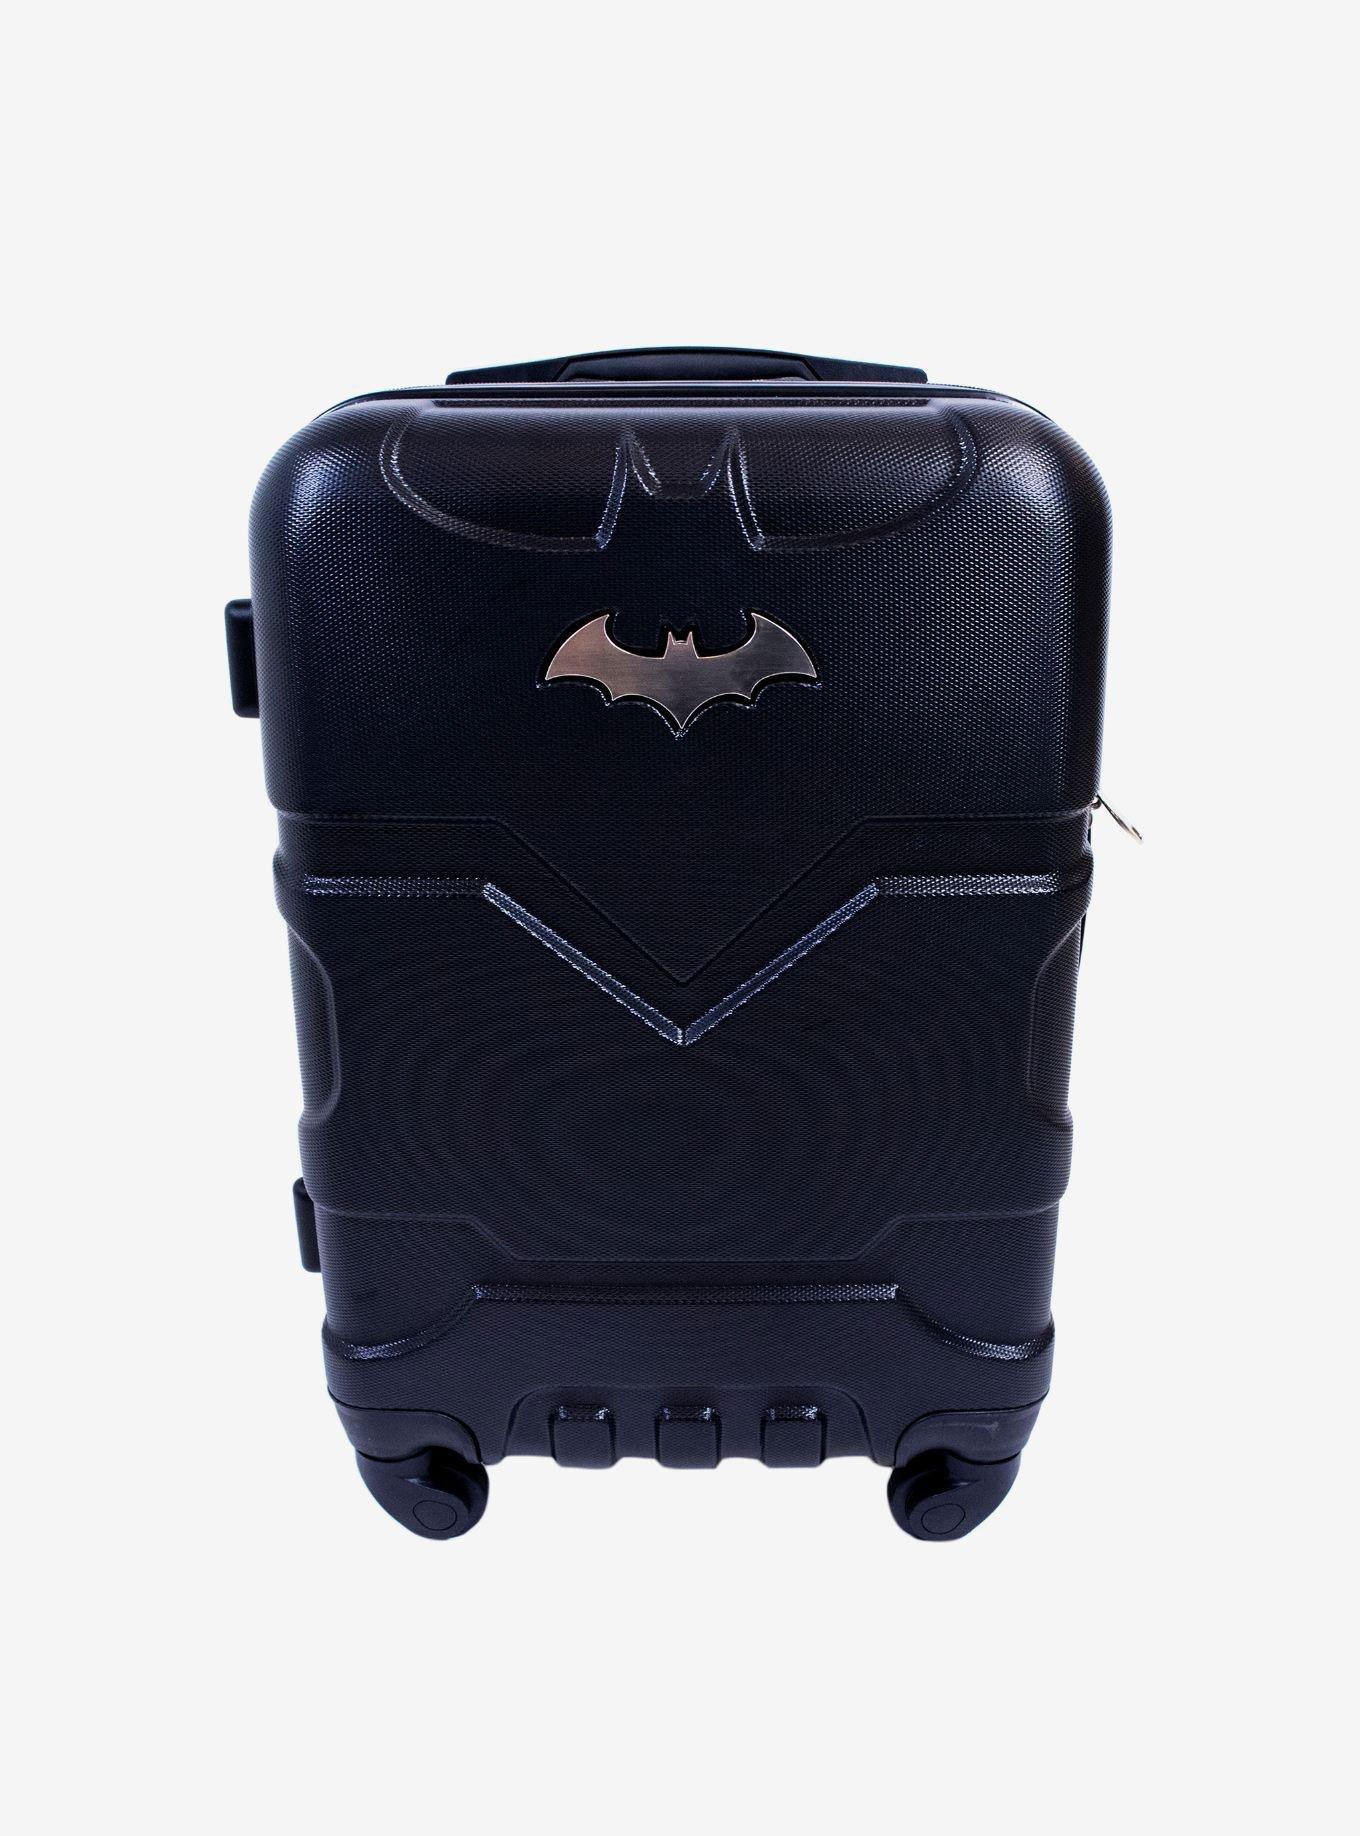 DC Comics Batman 21 Inch Hard Sided Carry-On Rolling Luggage, , hi-res